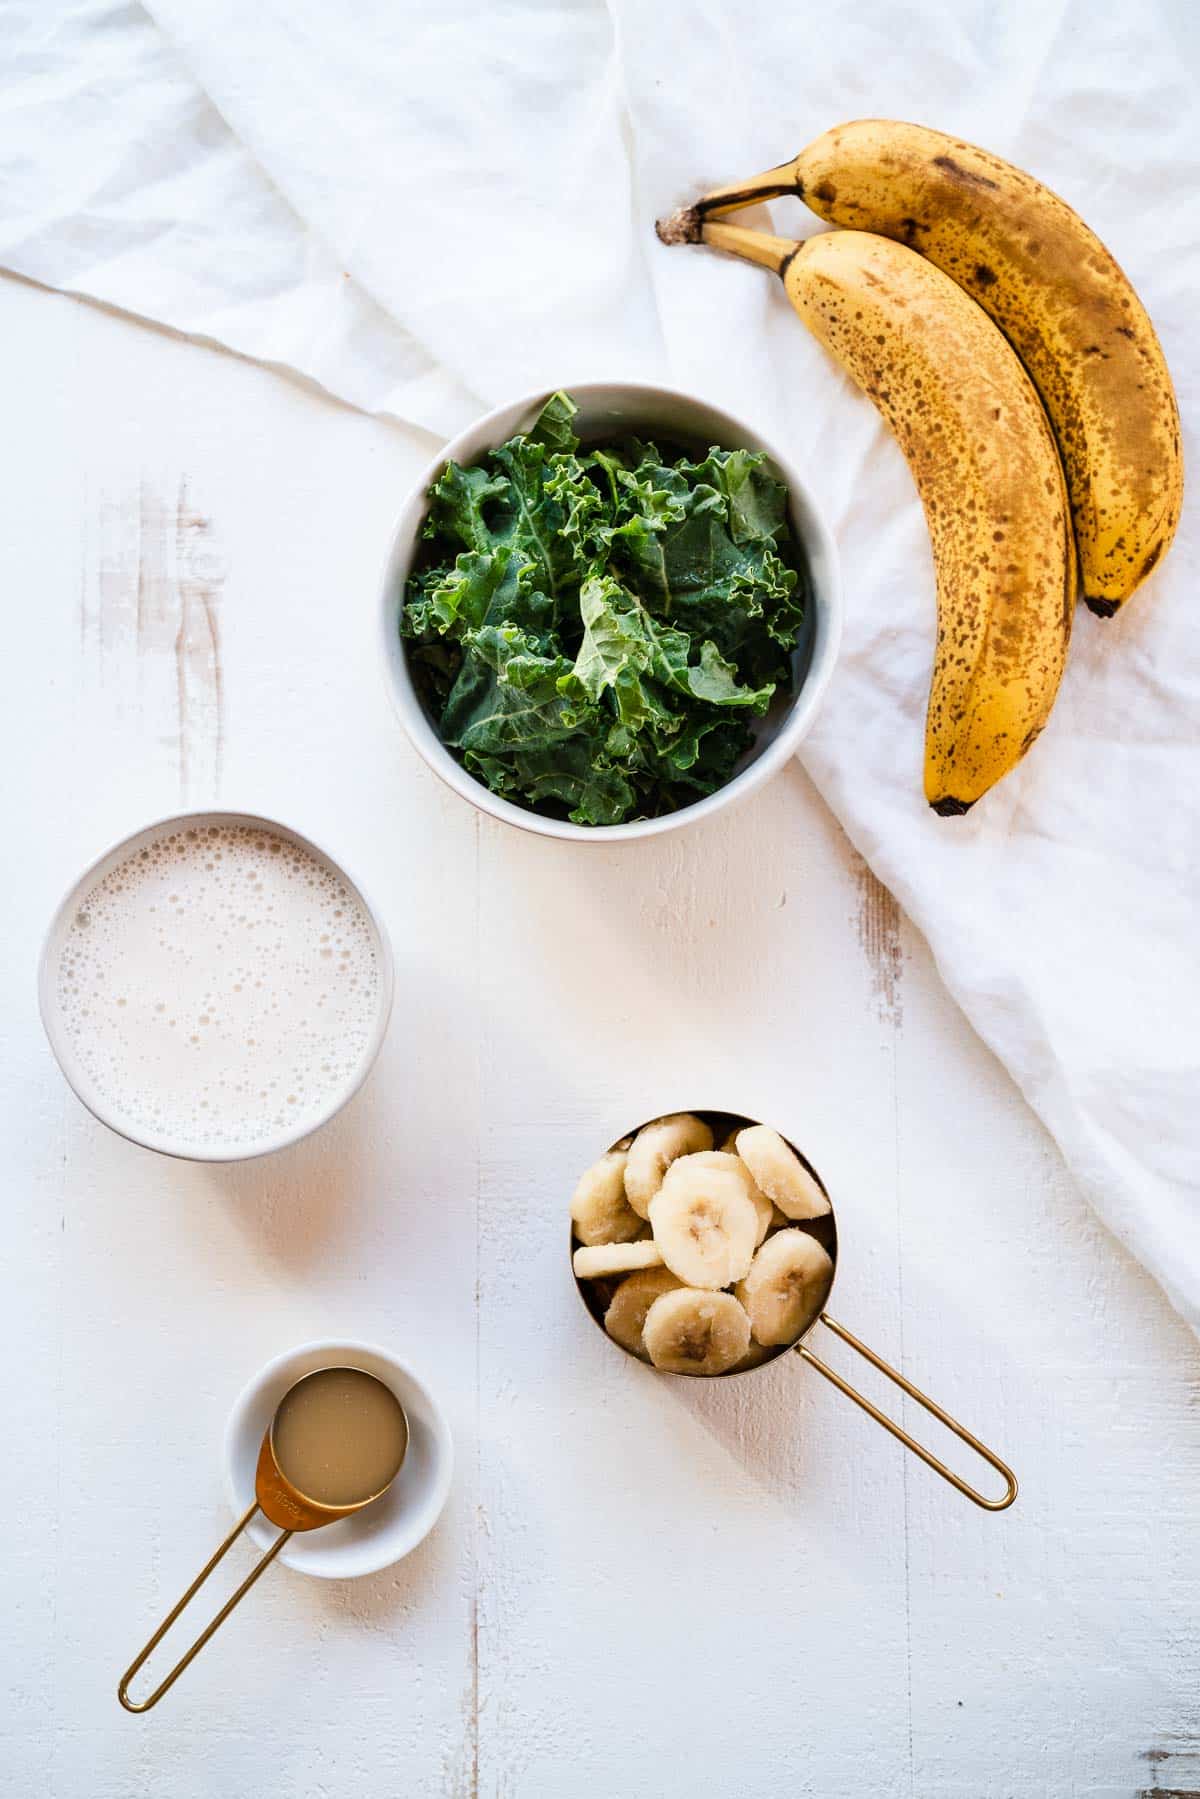 Ingredients for a banana kale smoothie on a white table.